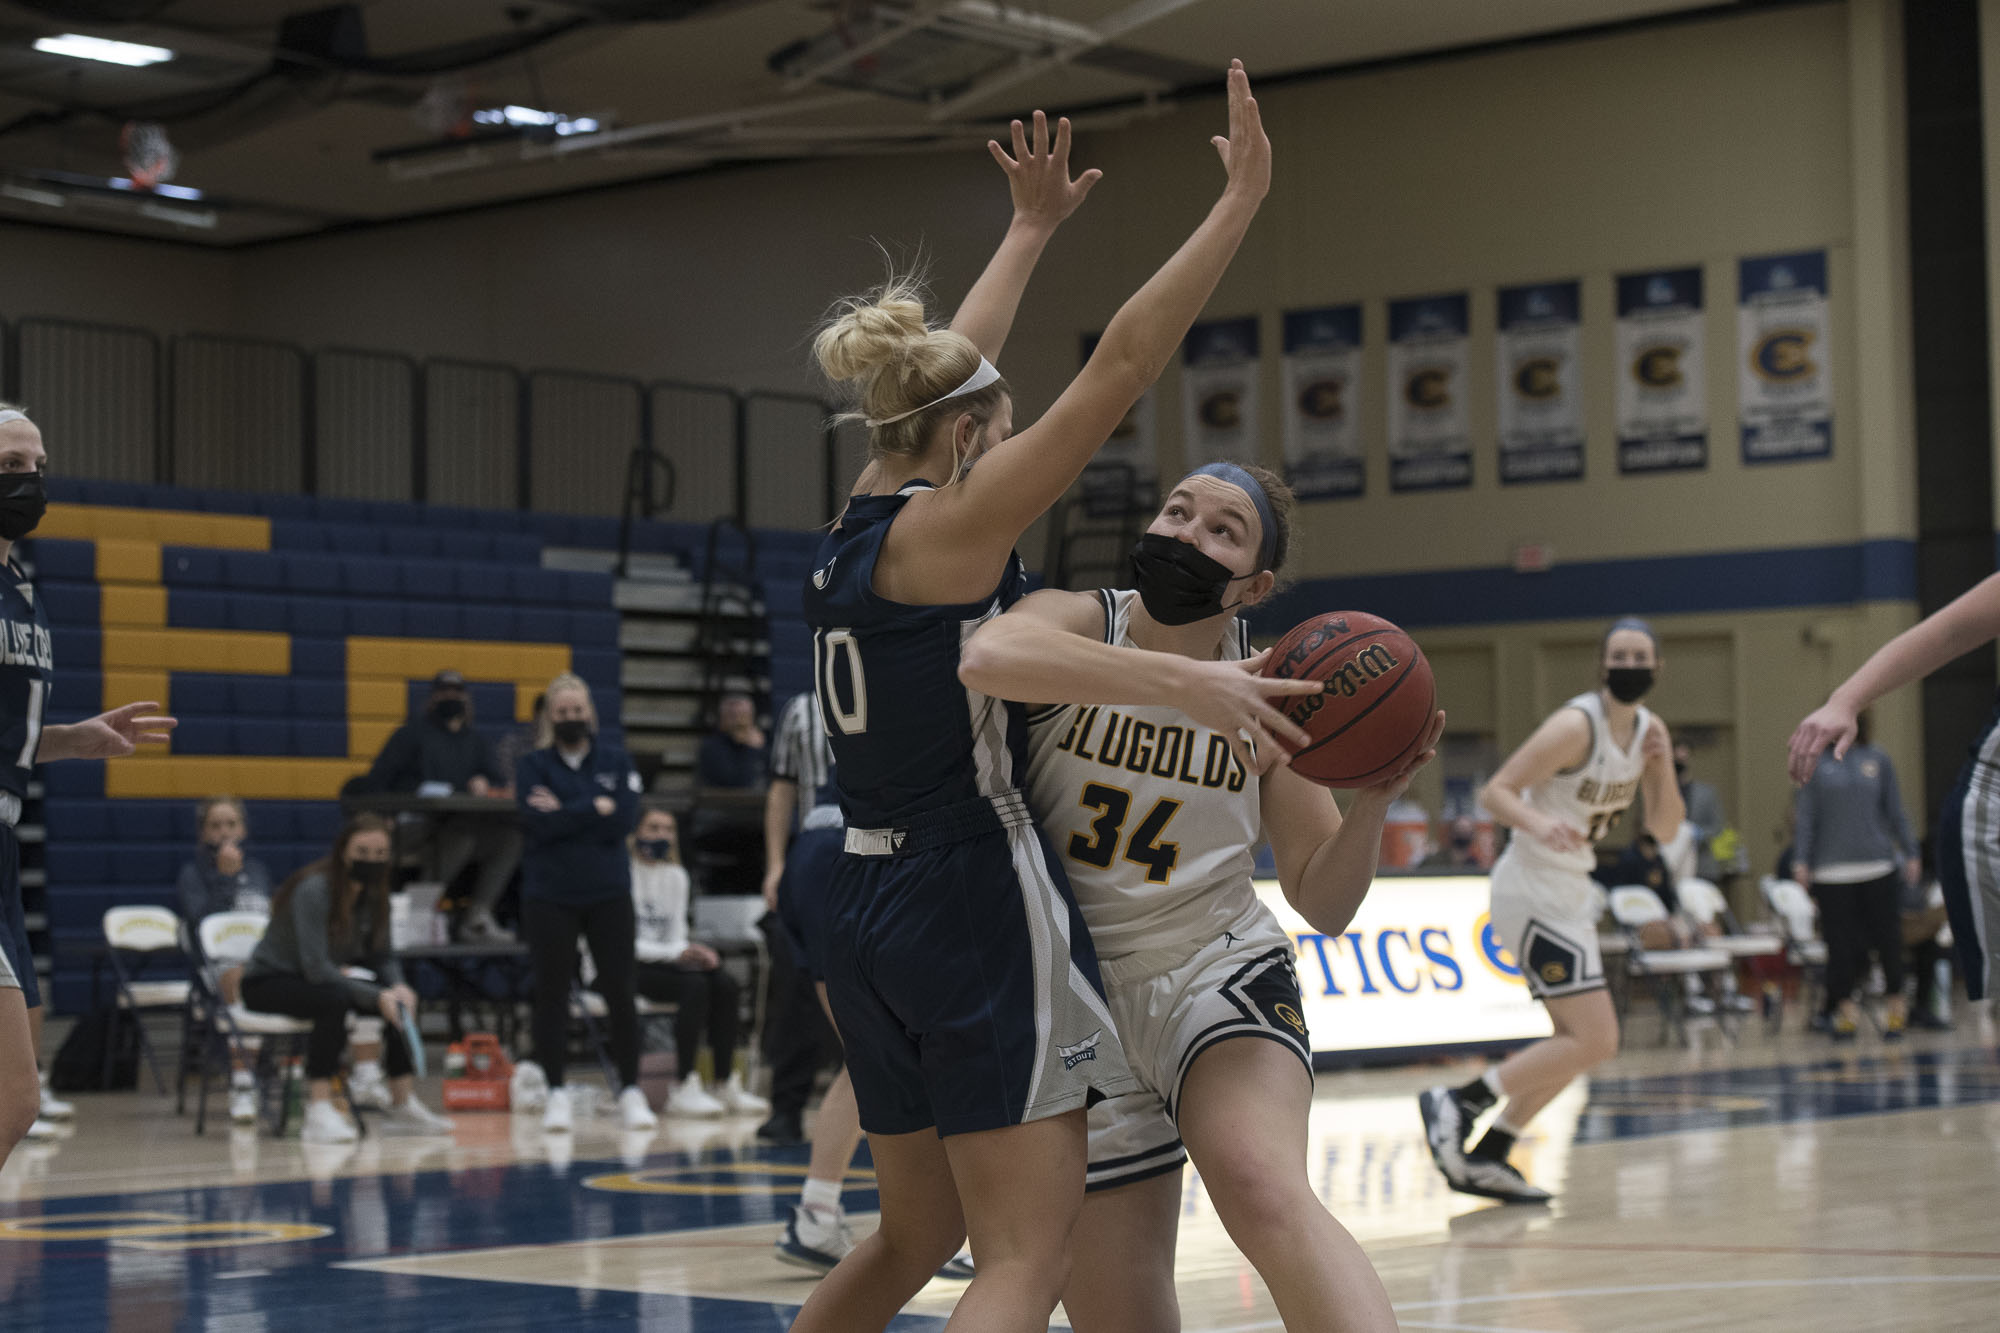 Women's Basketball downs Stout, improves to 3-0